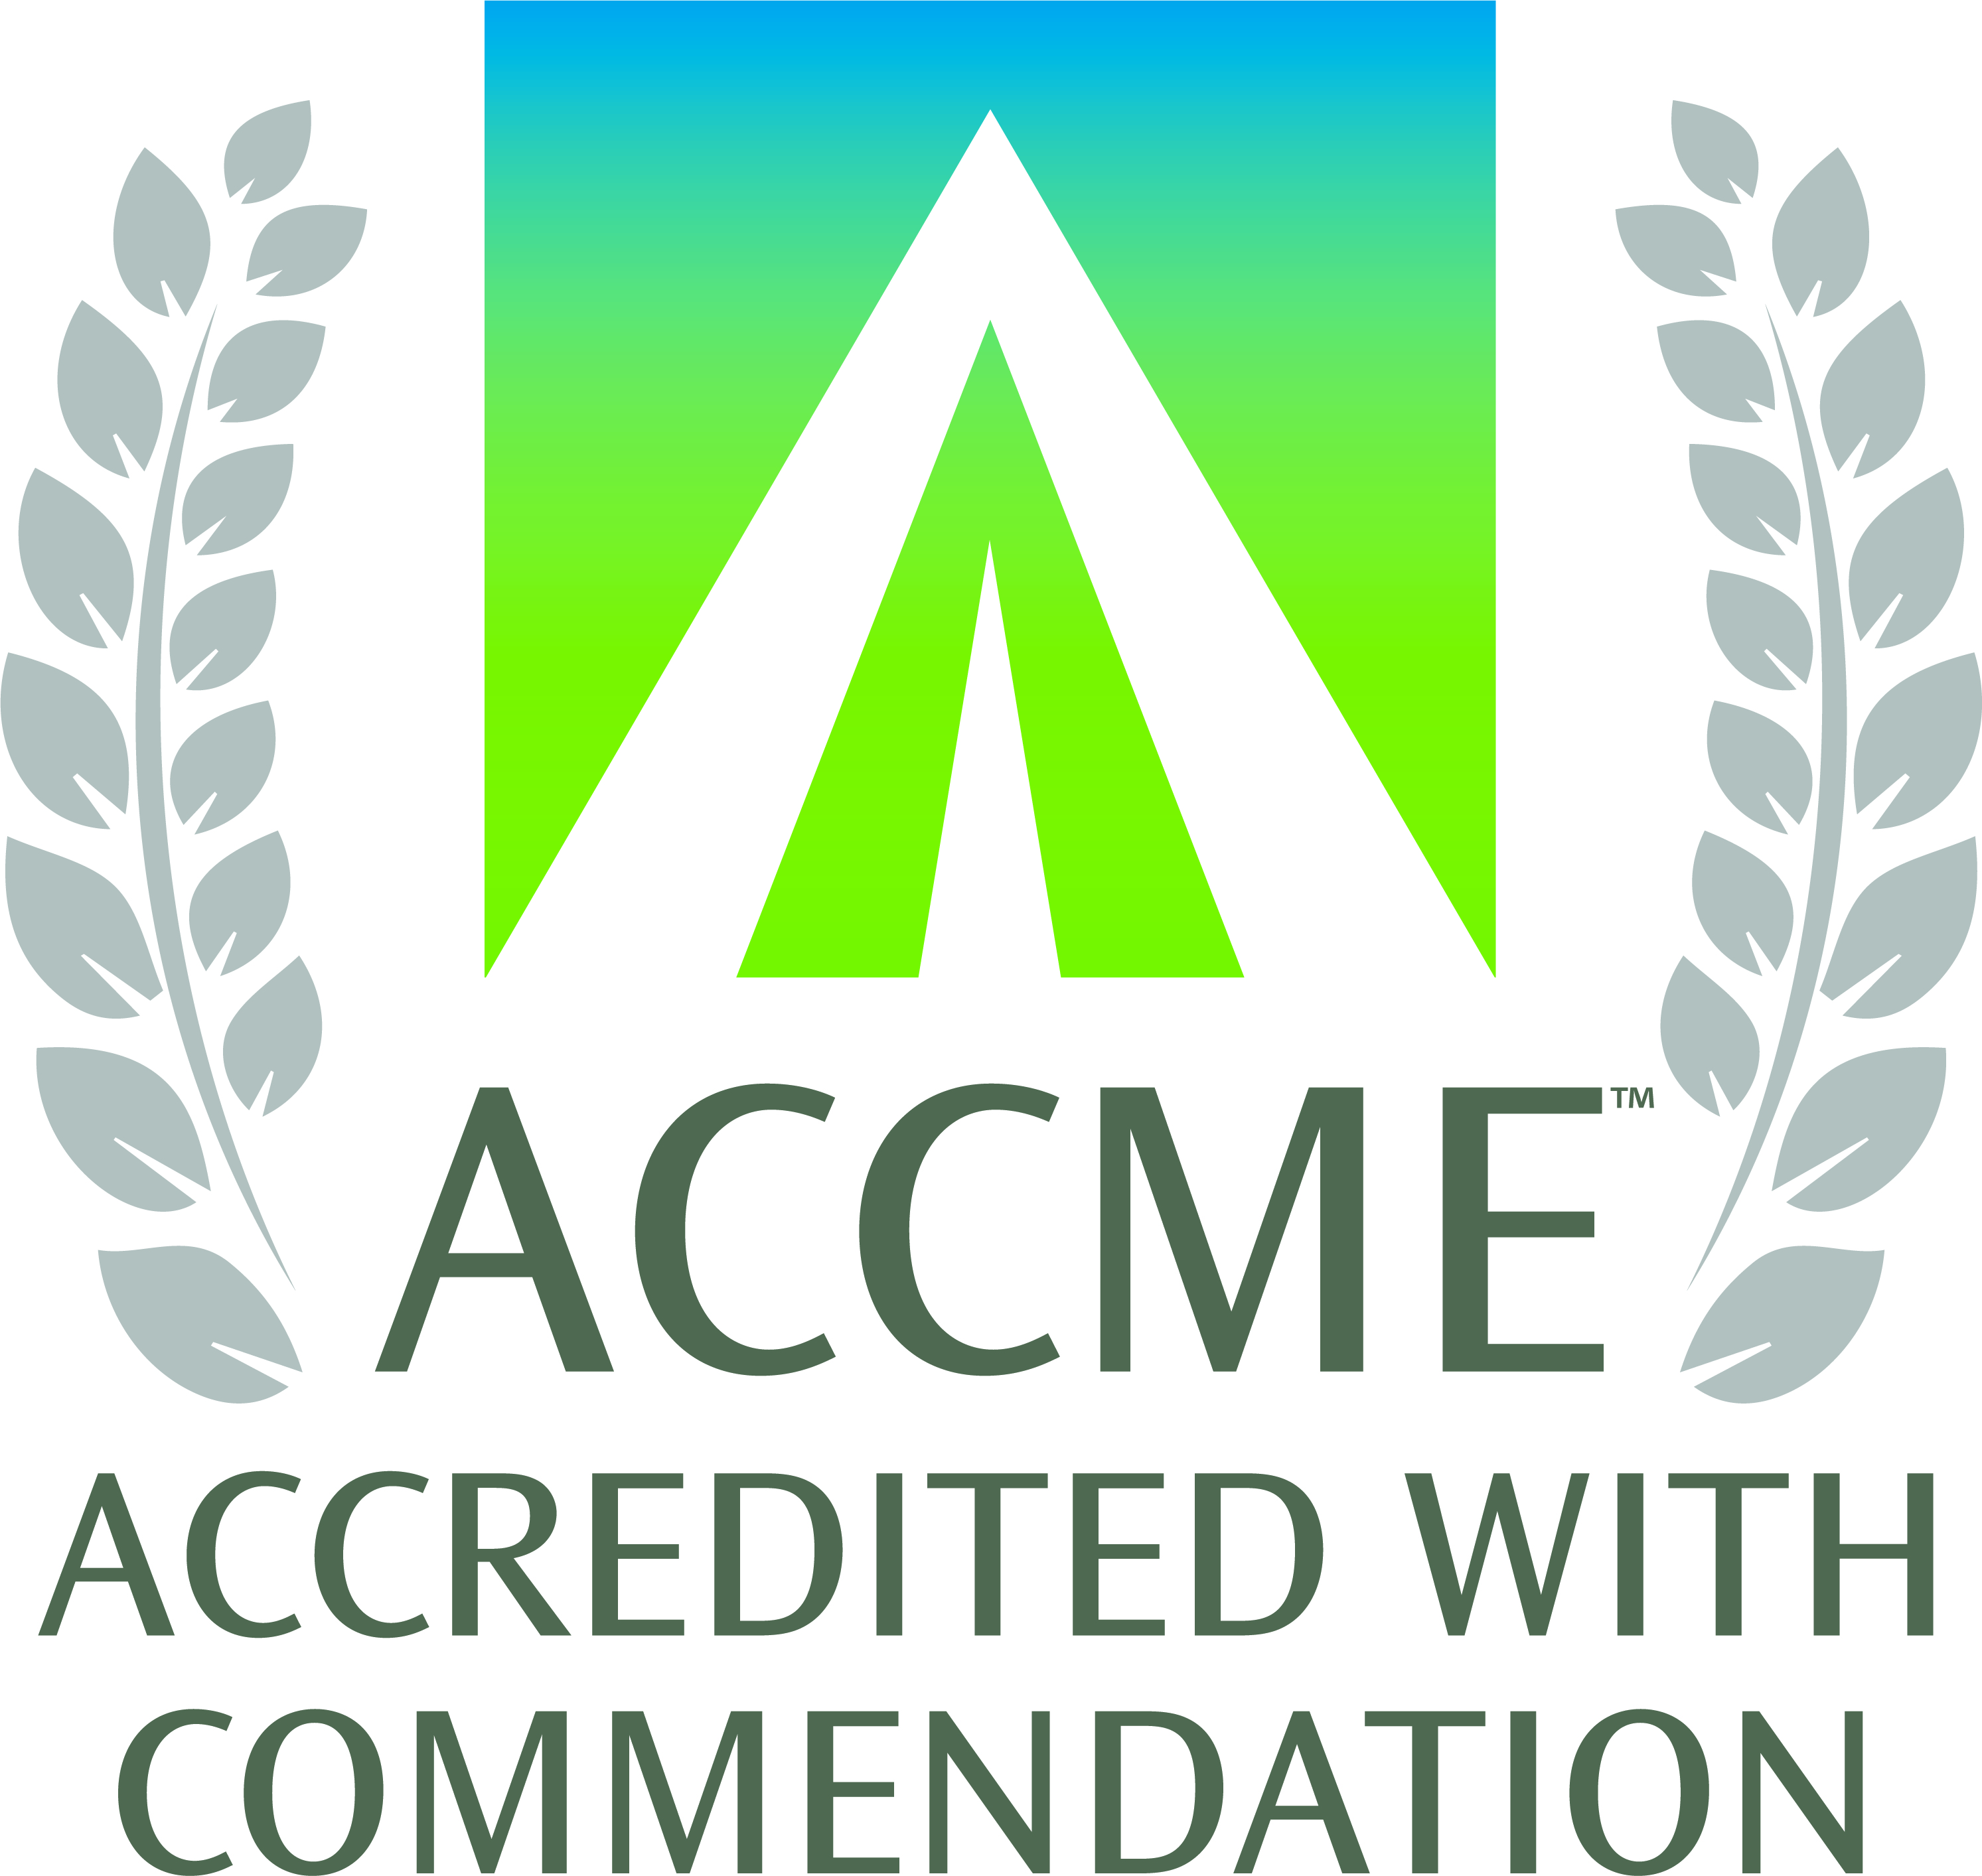 ACCME-commendation-full-color.jpg